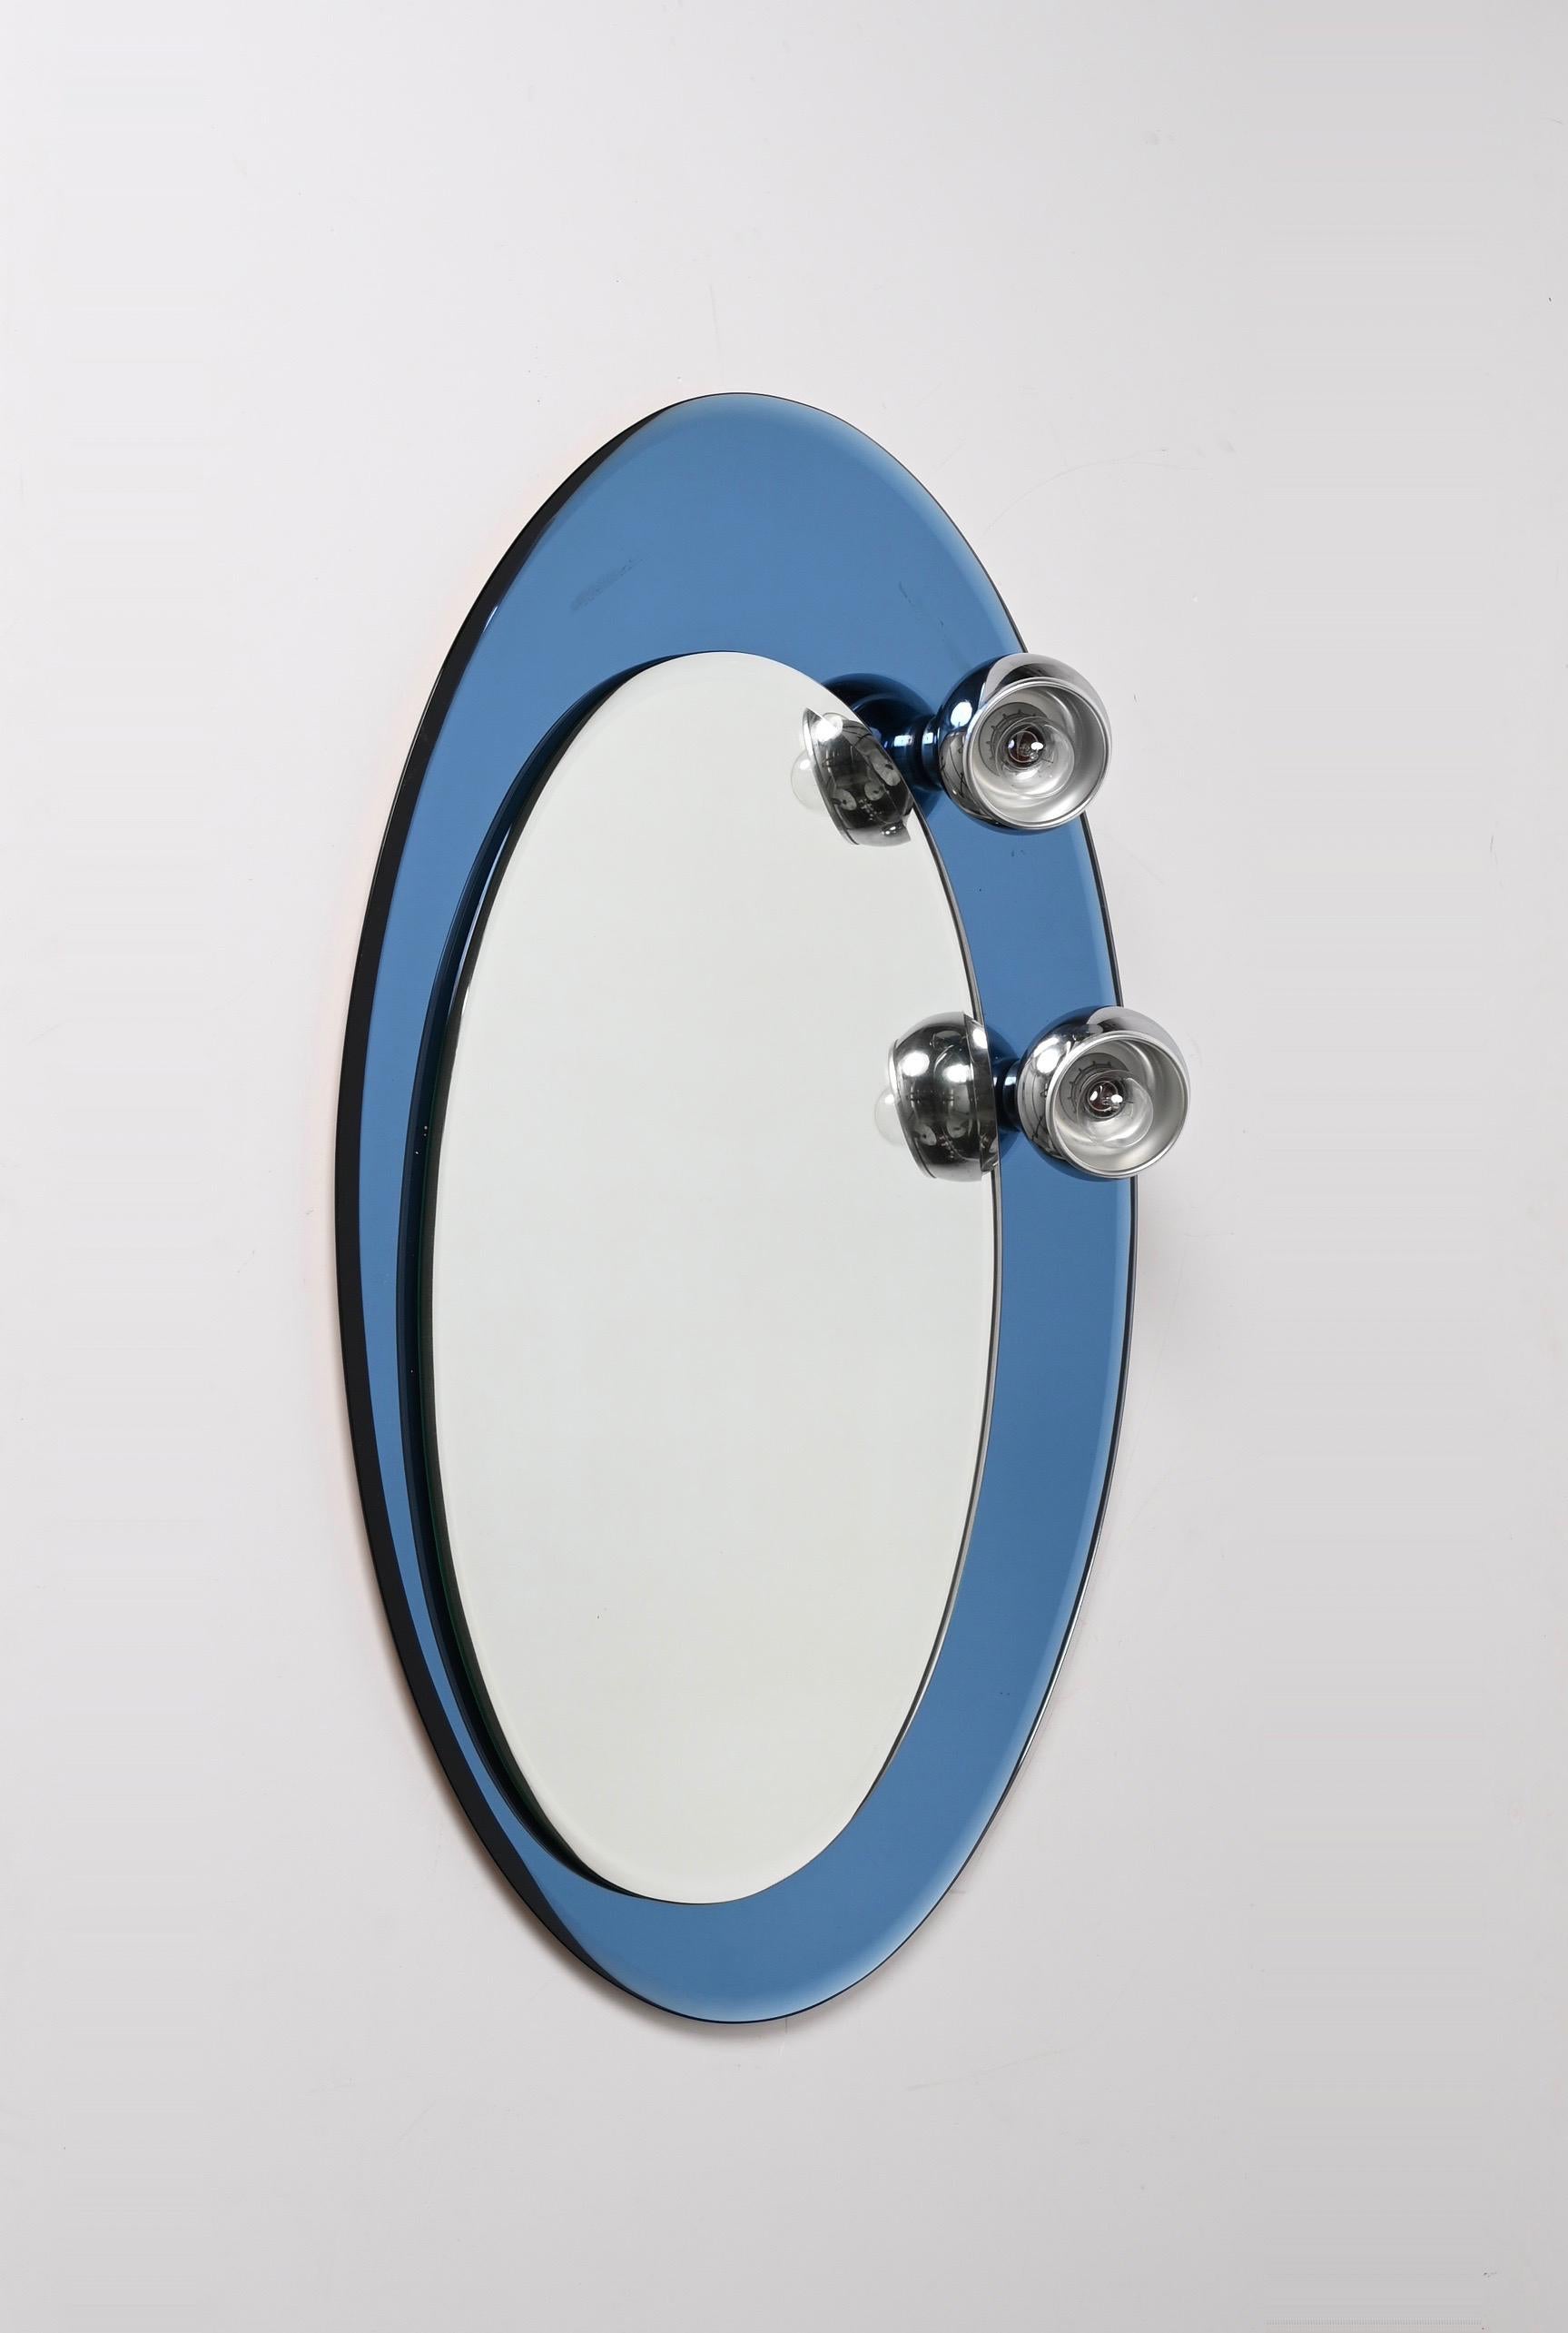 20th Century Midcentury Oval Wall Mirror with Blue Glass Frame and Magnetic Lights Italy 1960 For Sale